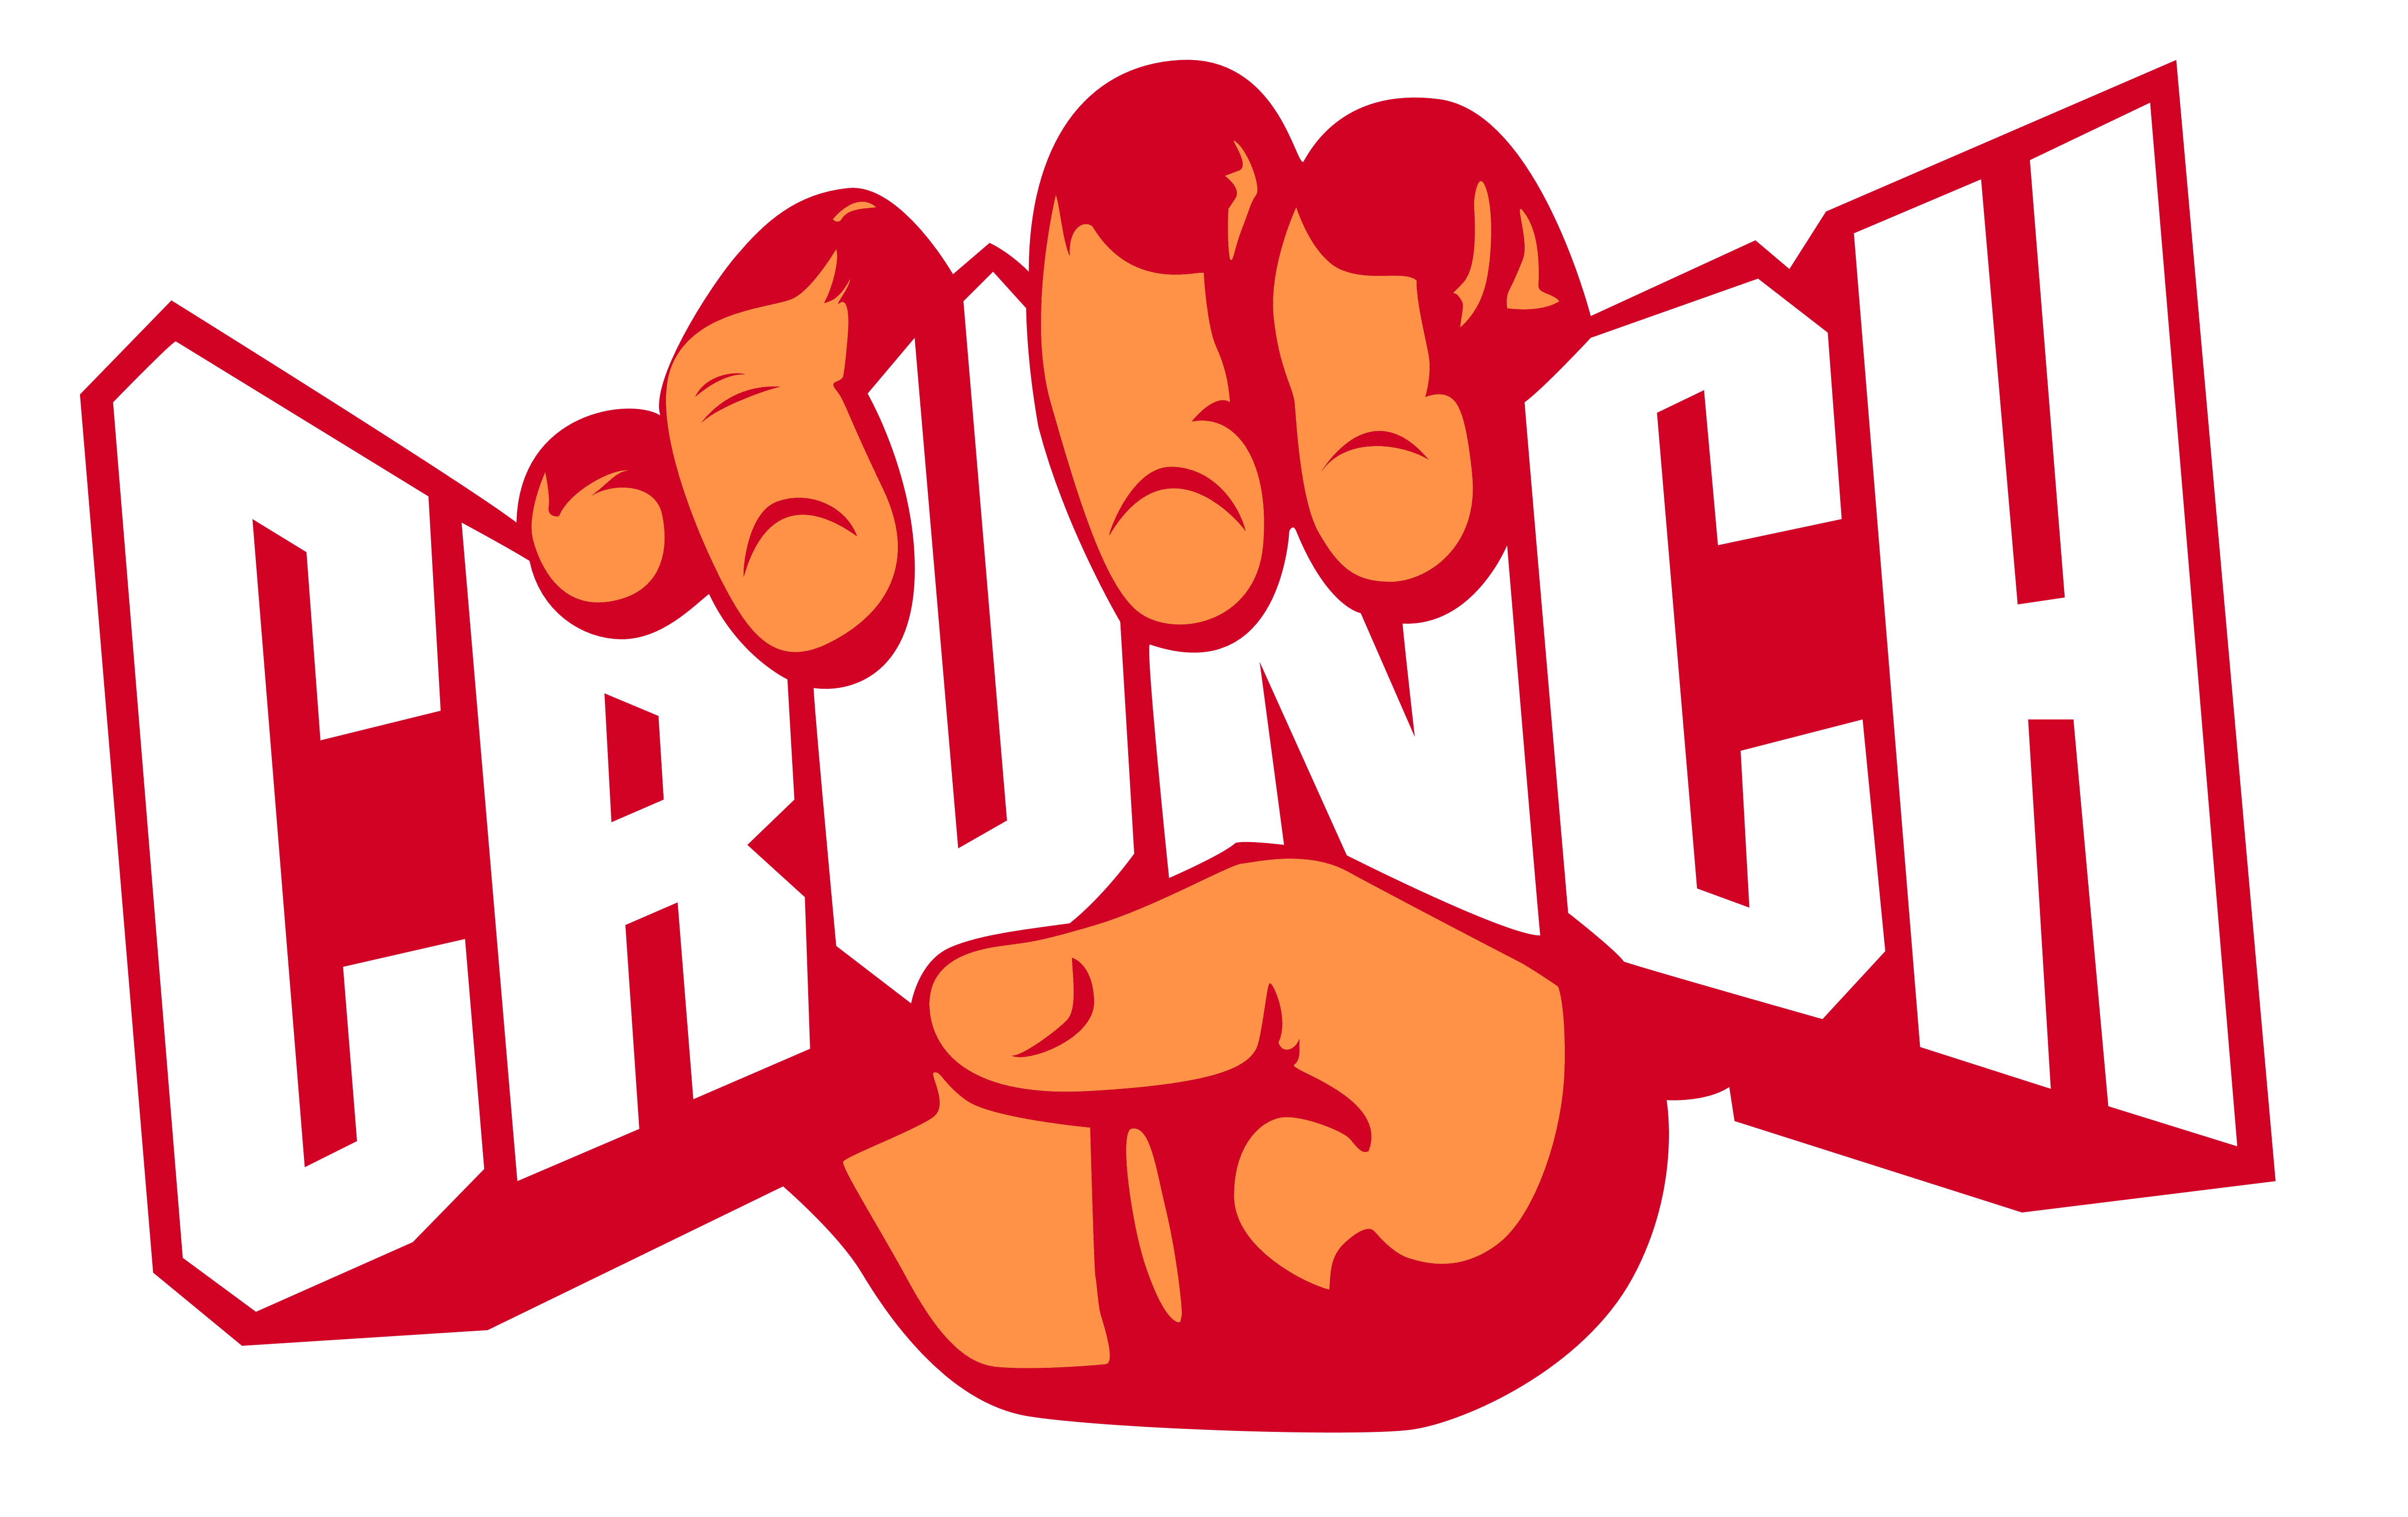 Refer Your Friends To Crunch!